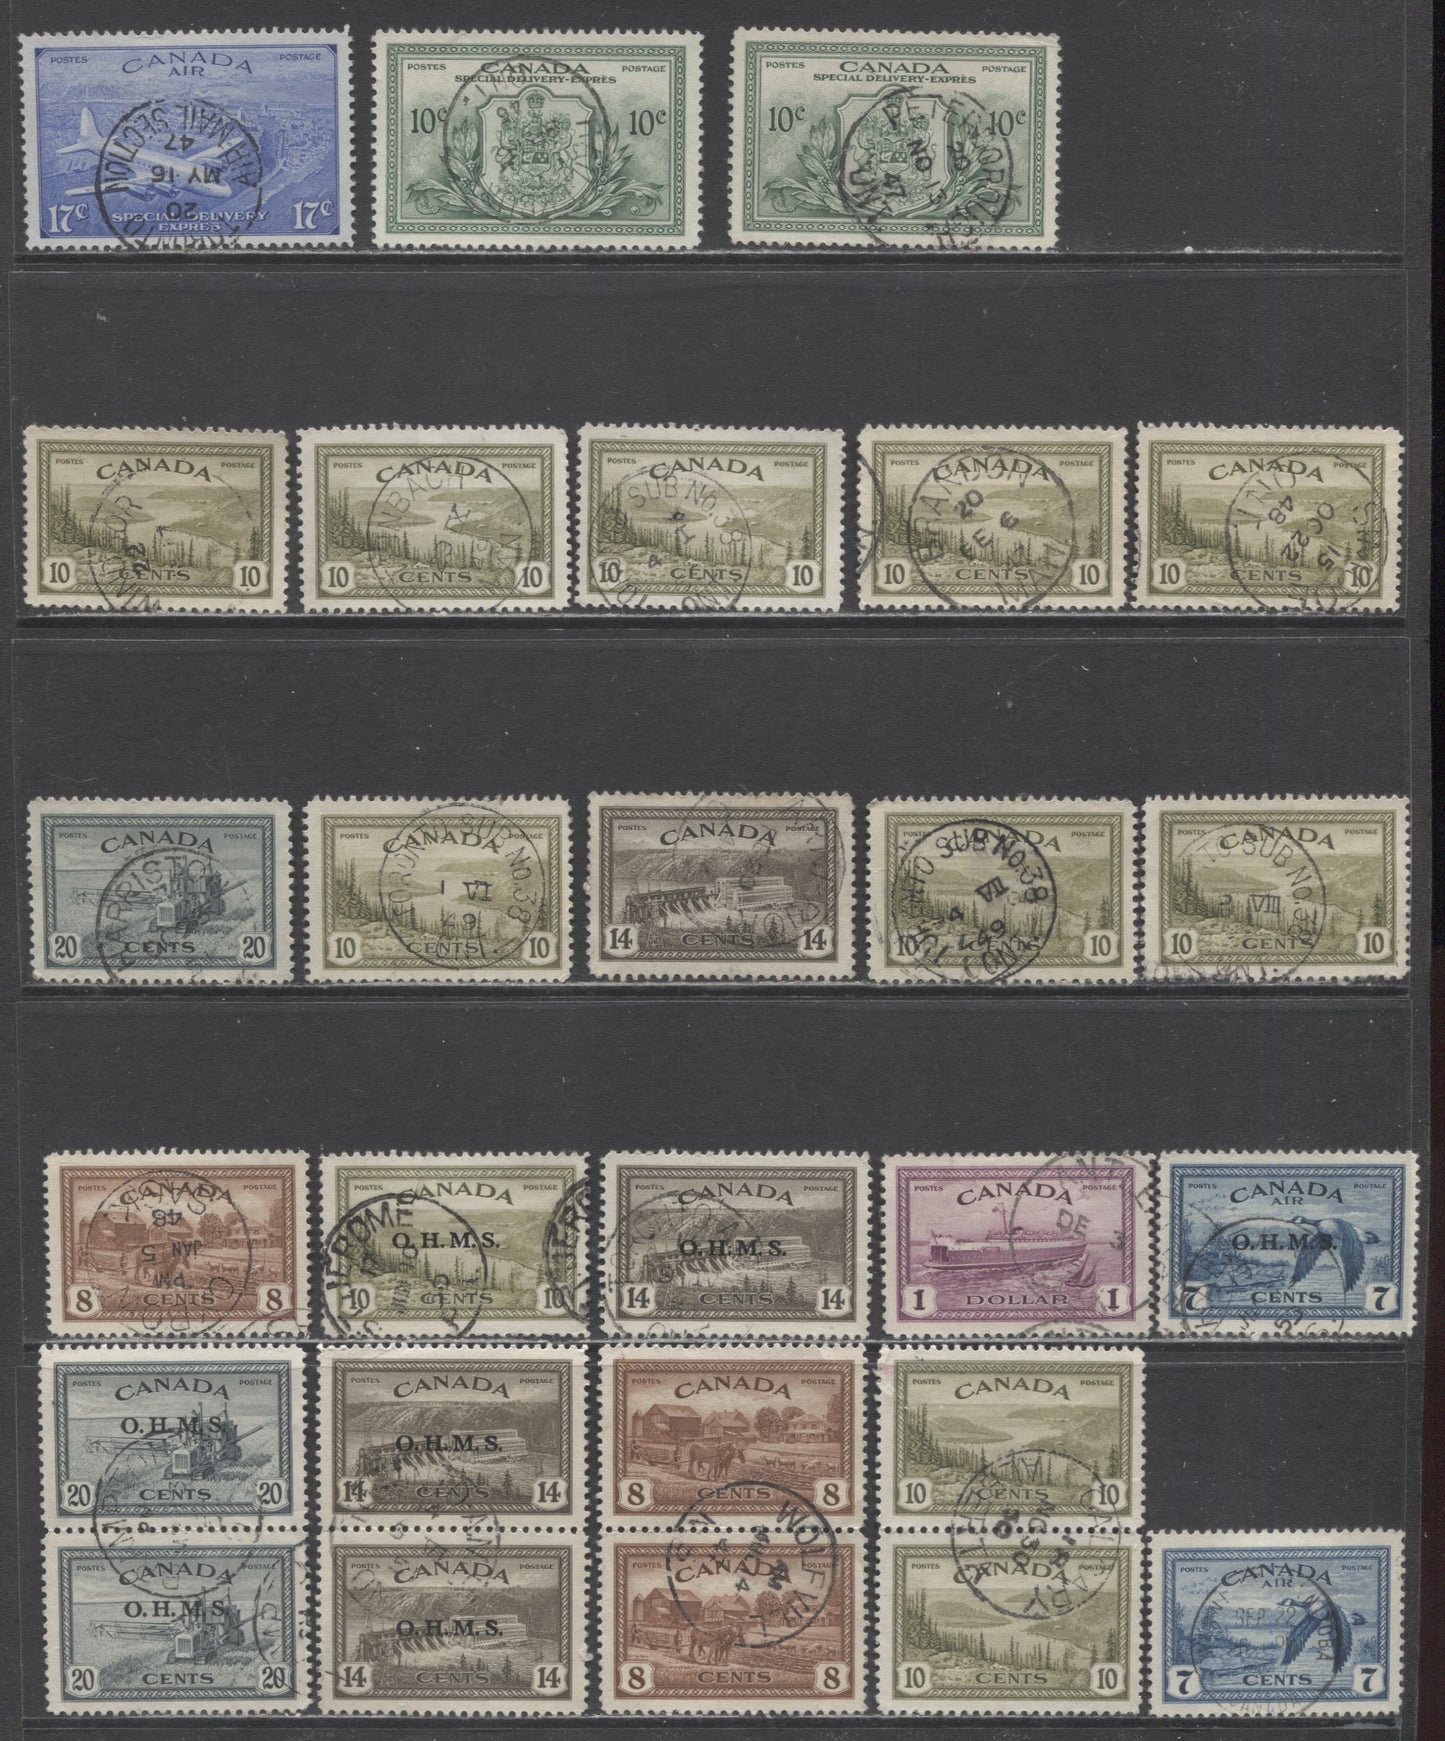 Lot 407 Canada #268-271, 273, C9, CE4, E11, O6-O8 8c-20c, $1, 17c, 7c Red Brown - Rose Lilac Various Scenes, 1946-1952 Peace Issue, 19 VF Used Singles, With SON Dated CDS Town Cancels & In-Period